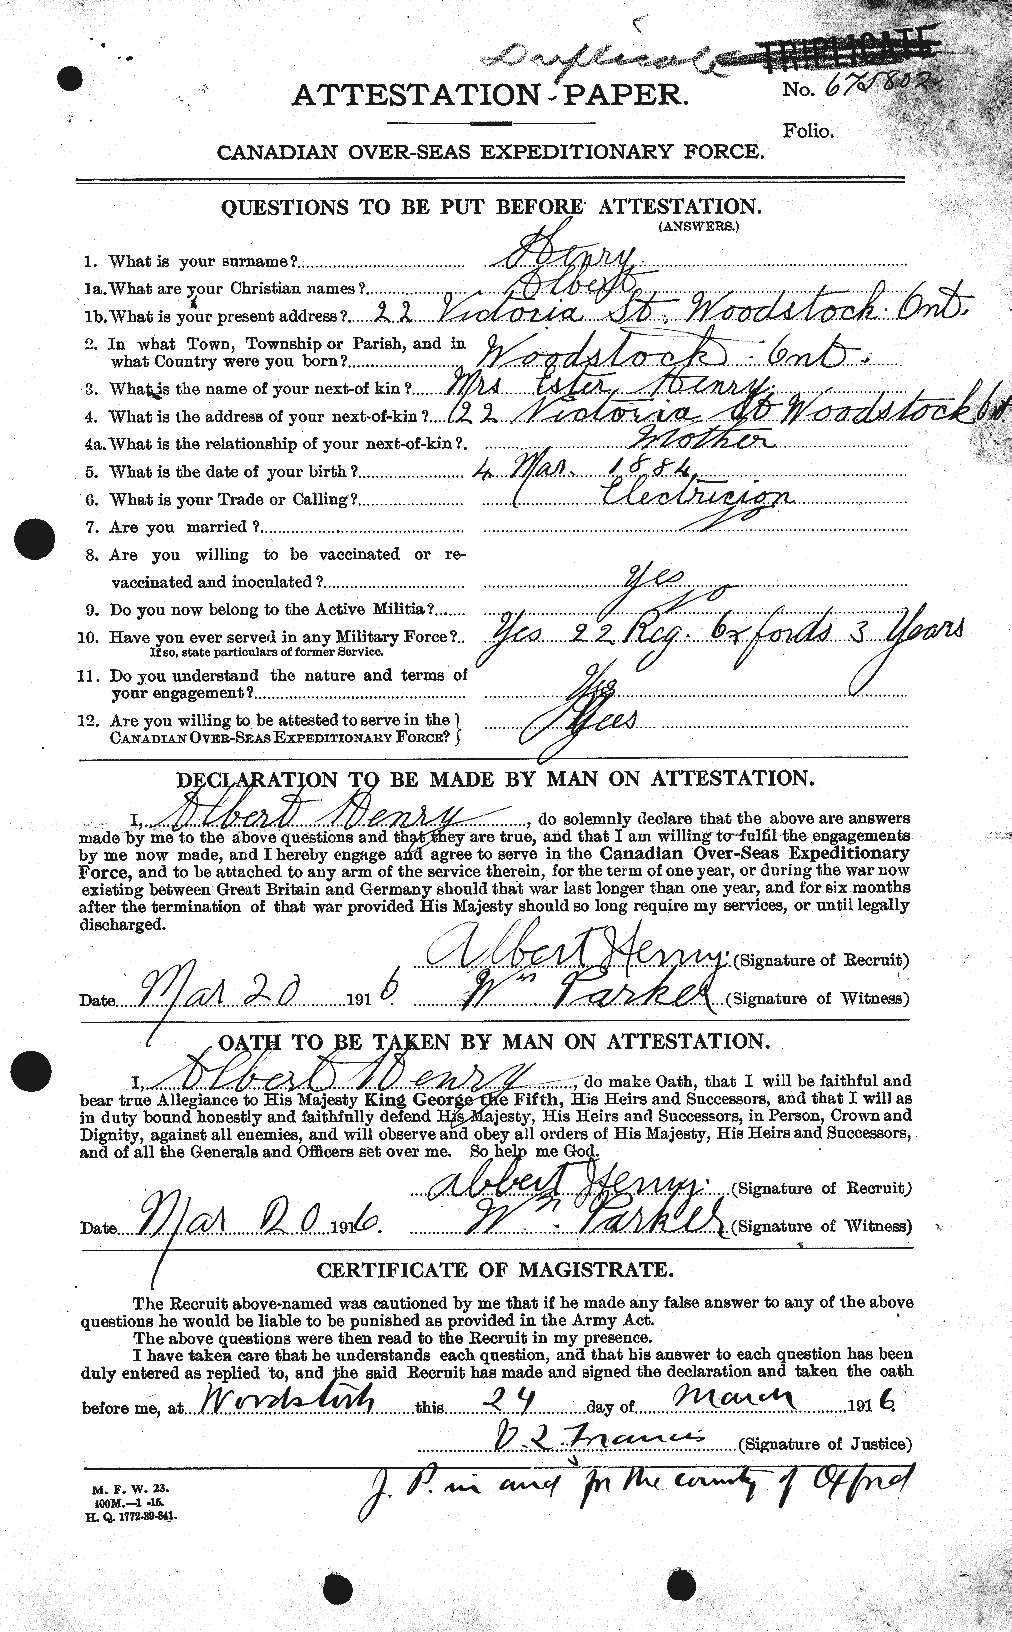 Personnel Records of the First World War - CEF 391647a